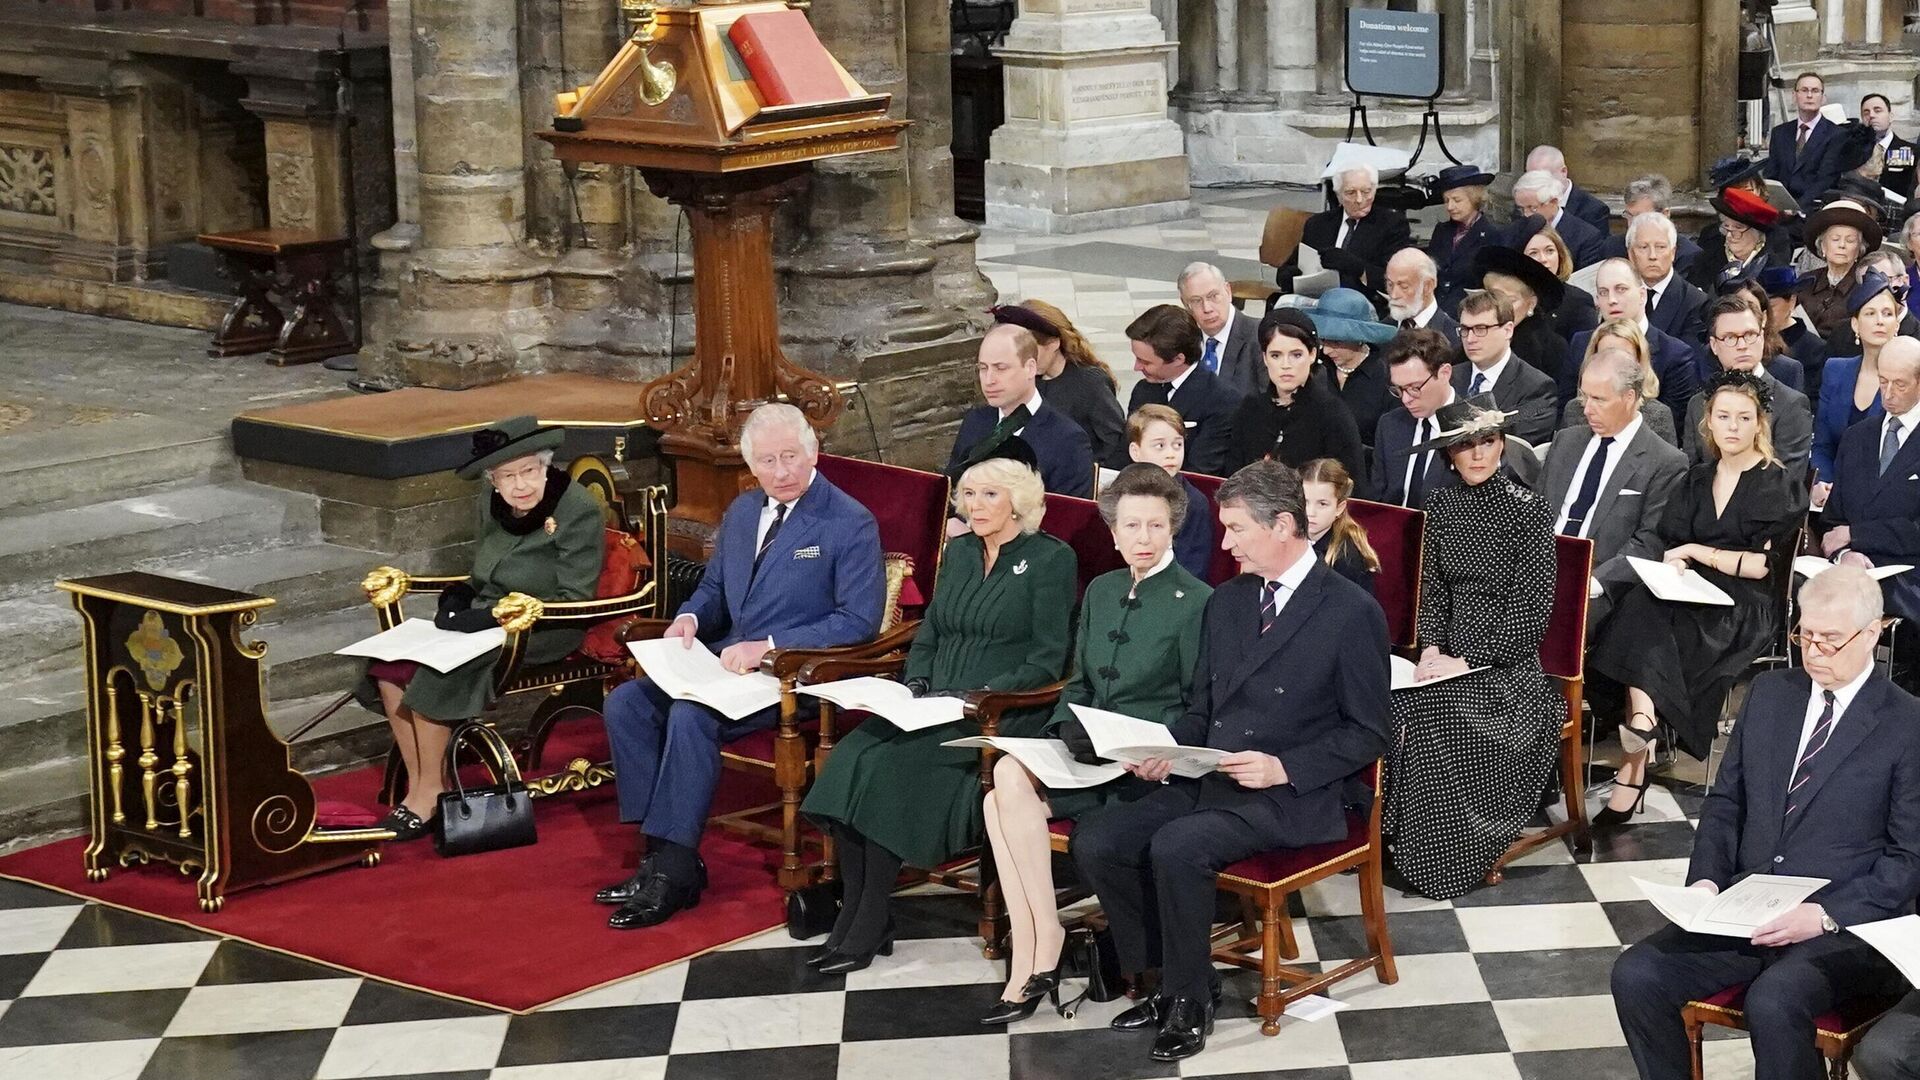 Front row from left, Britain's Queen Elizabeth II, Britain's Prince Charles, Camilla, Duchess of Cornwall, Britain's Princess Anne, Tim Laurence, and Britain's Prince Andrew, attend a Service of Thanksgiving for the life of Prince Philip, Duke of Edinburgh at Westminster Abbey in London, Tuesday, March 29, 2022 - Sputnik International, 1920, 29.03.2022